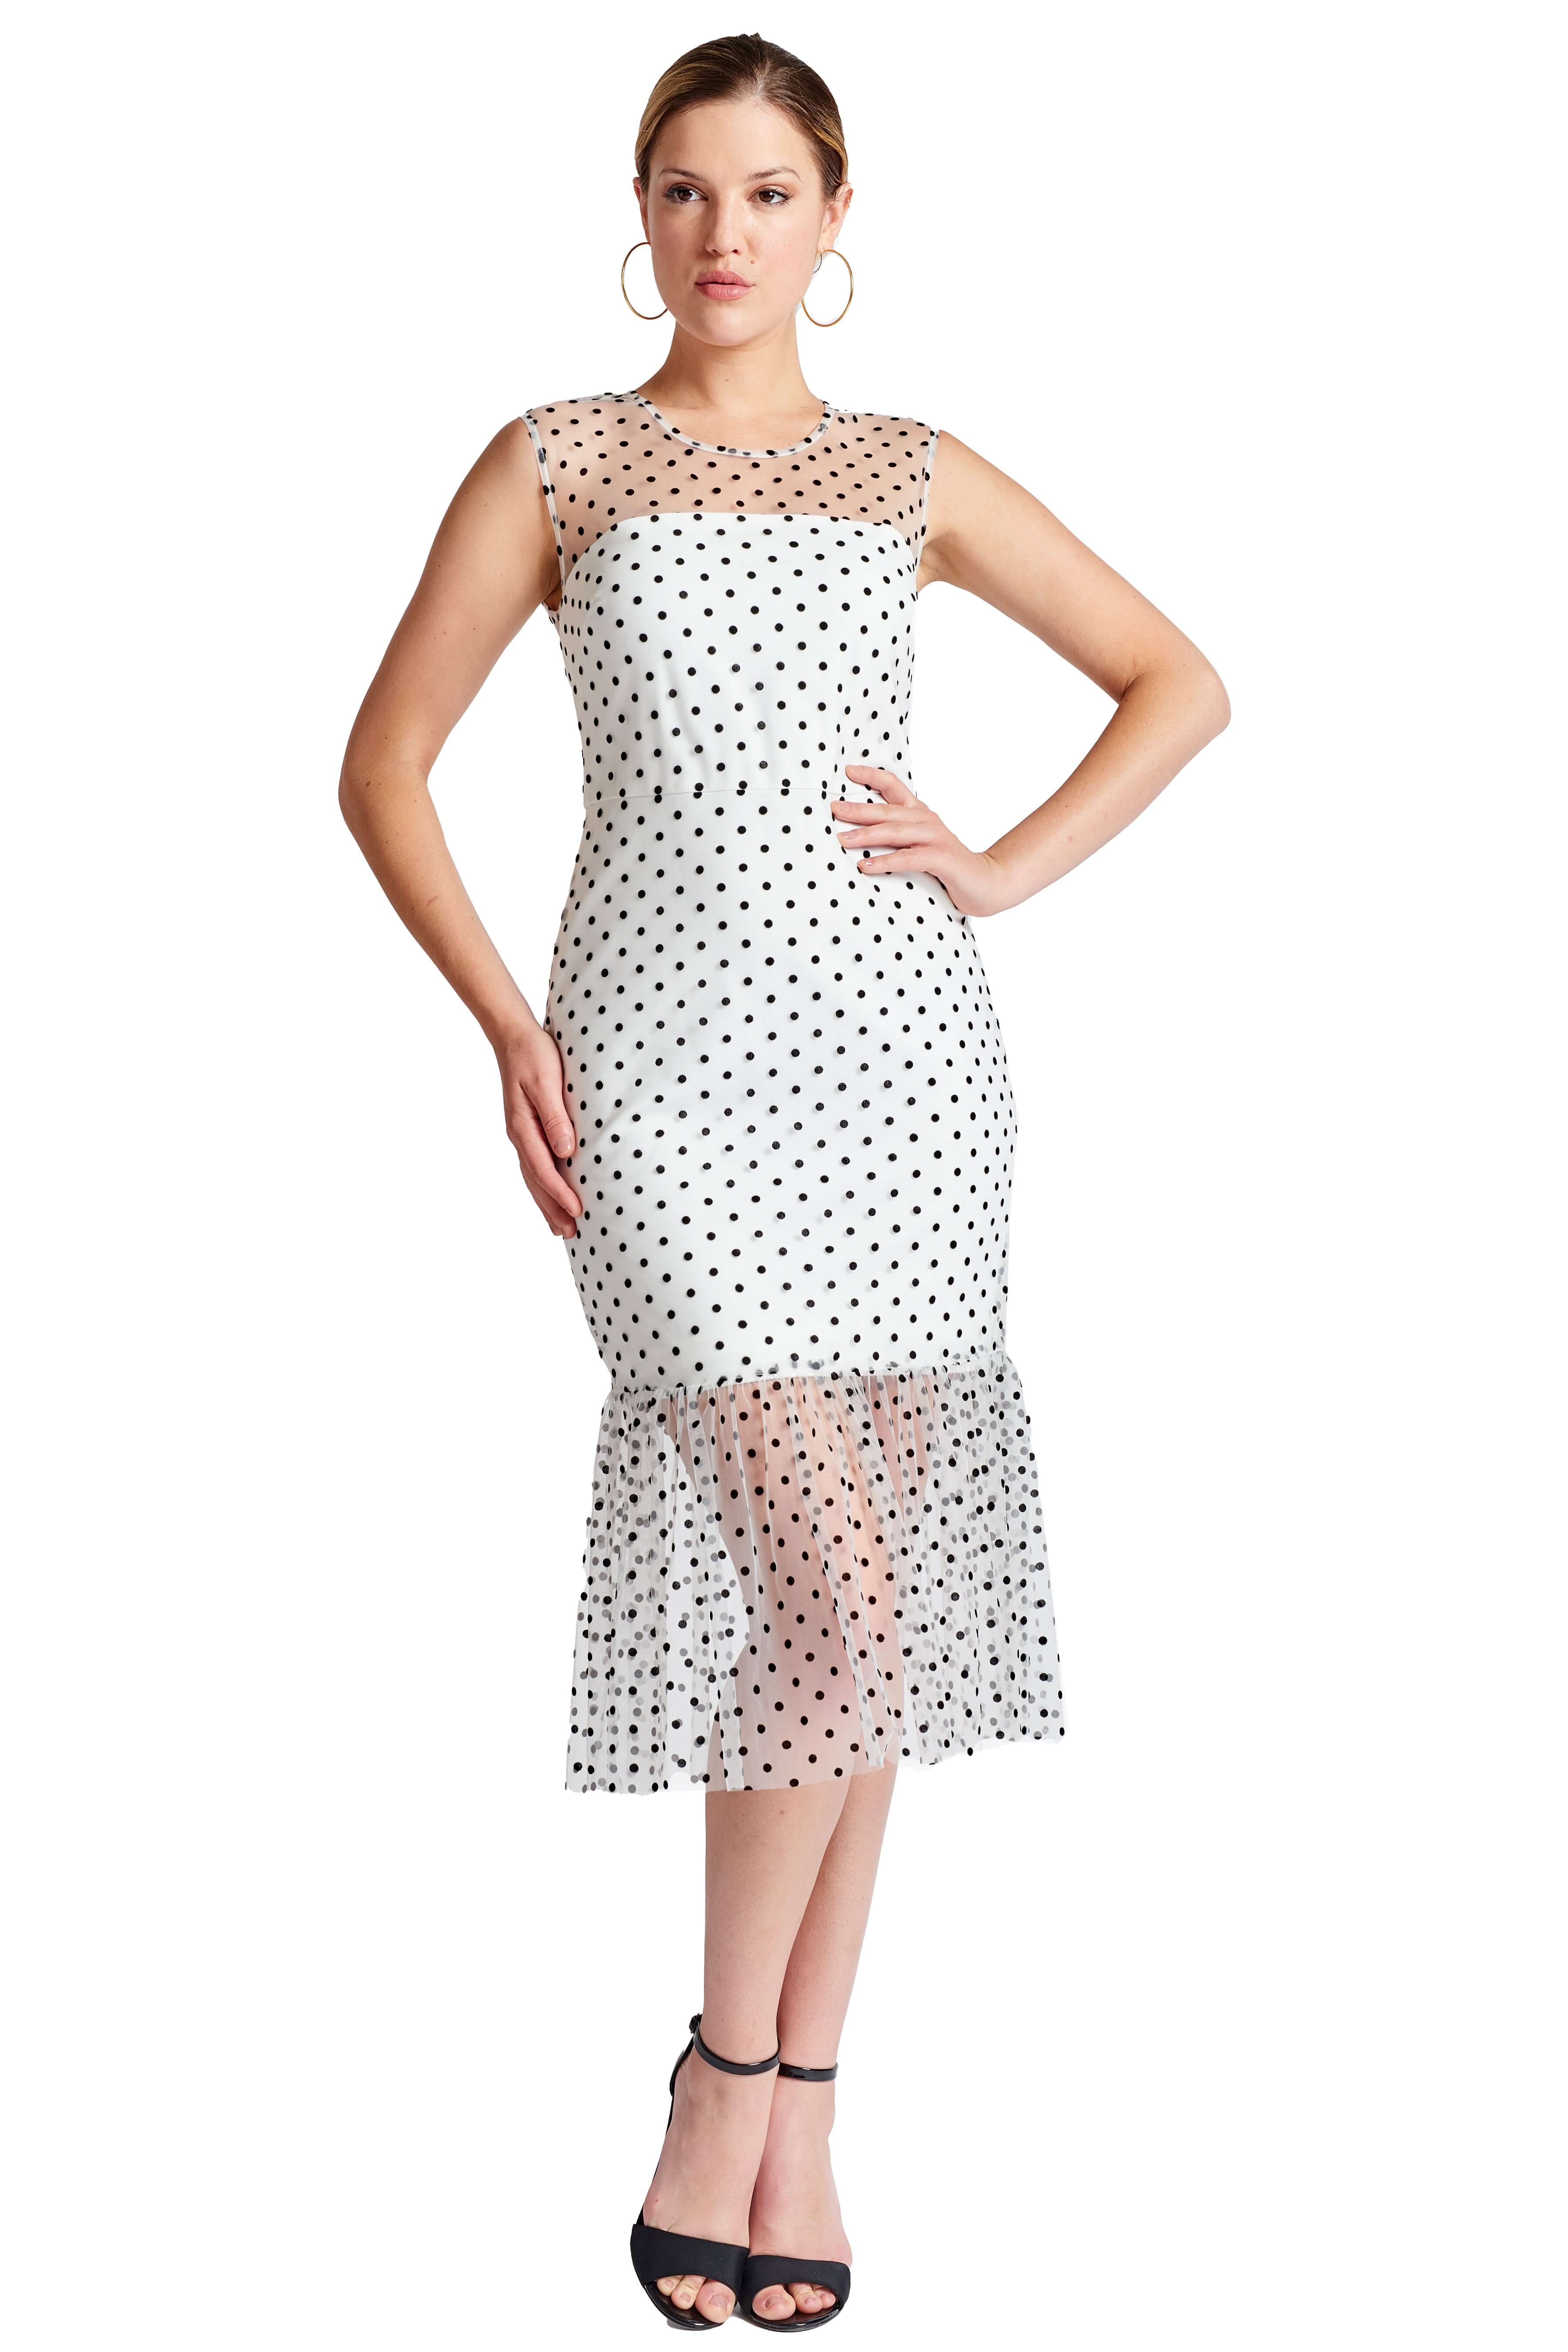 Front view of model wearing the Simona Maghen Muse dress, white mesh with black polka dots sleeveless midi dress with sheer ruffle hem and round neckline.